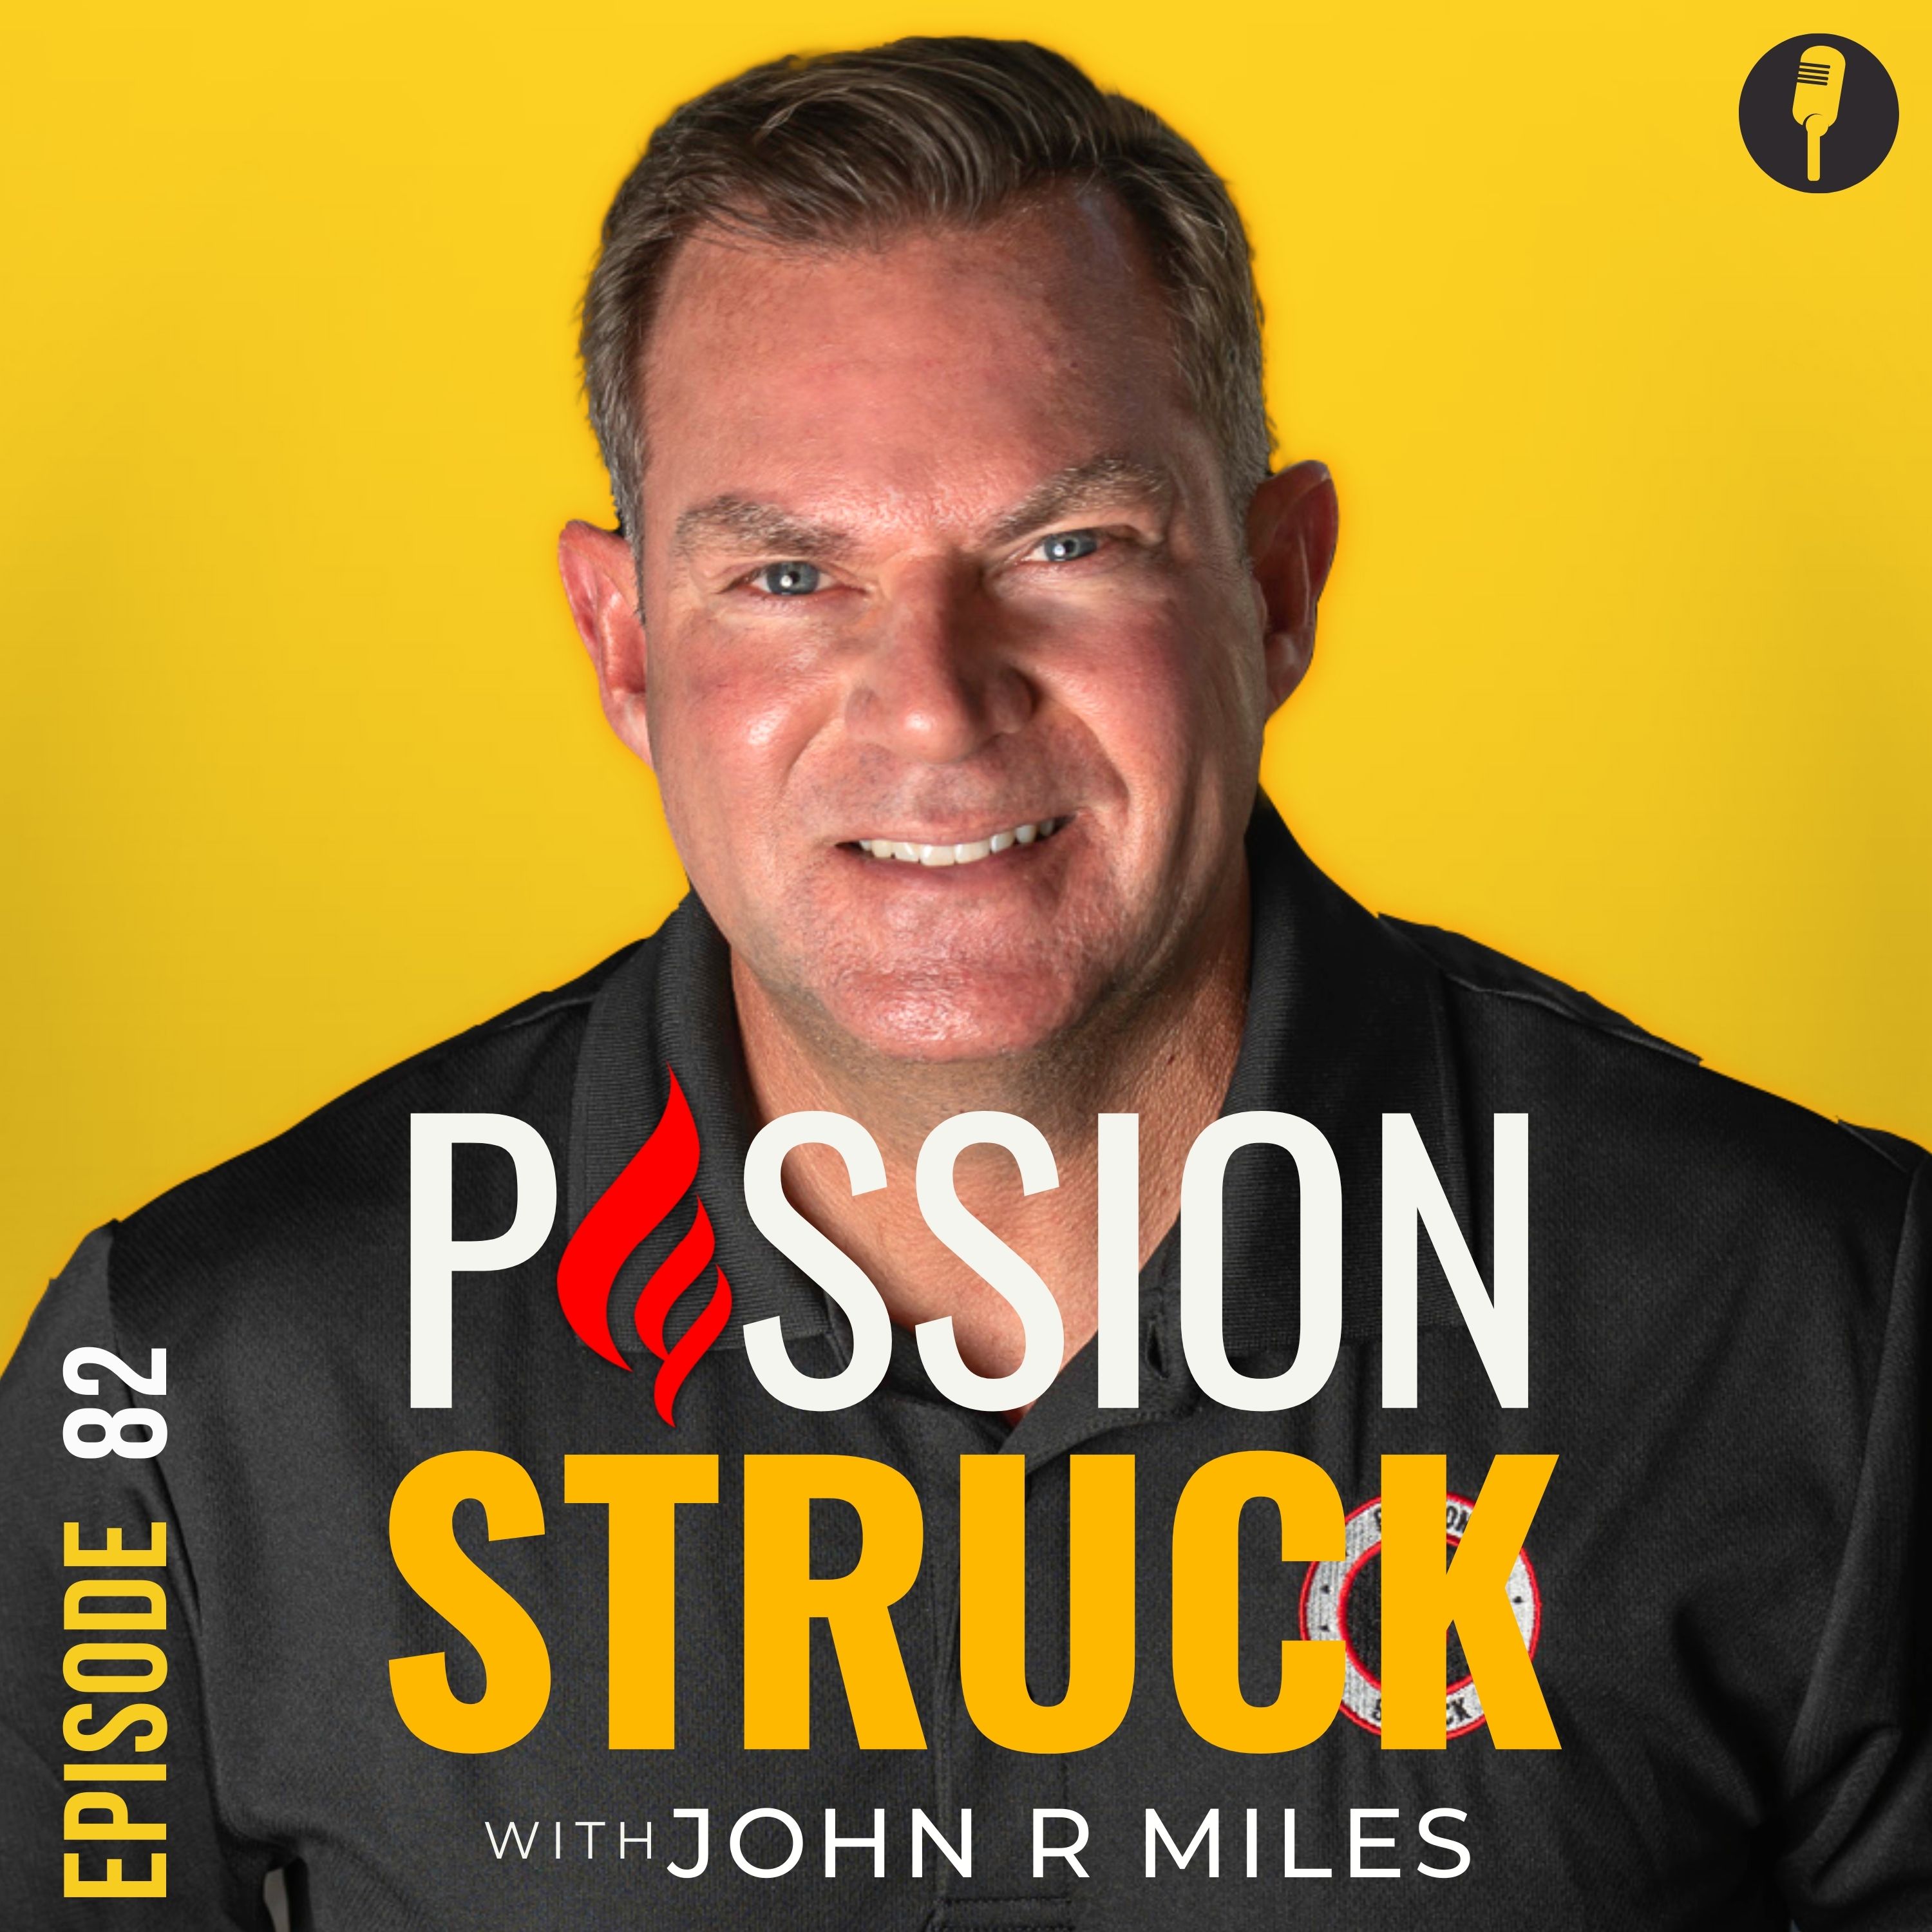 Passion Struck Podcast episode 82 cover album with John R. Miles